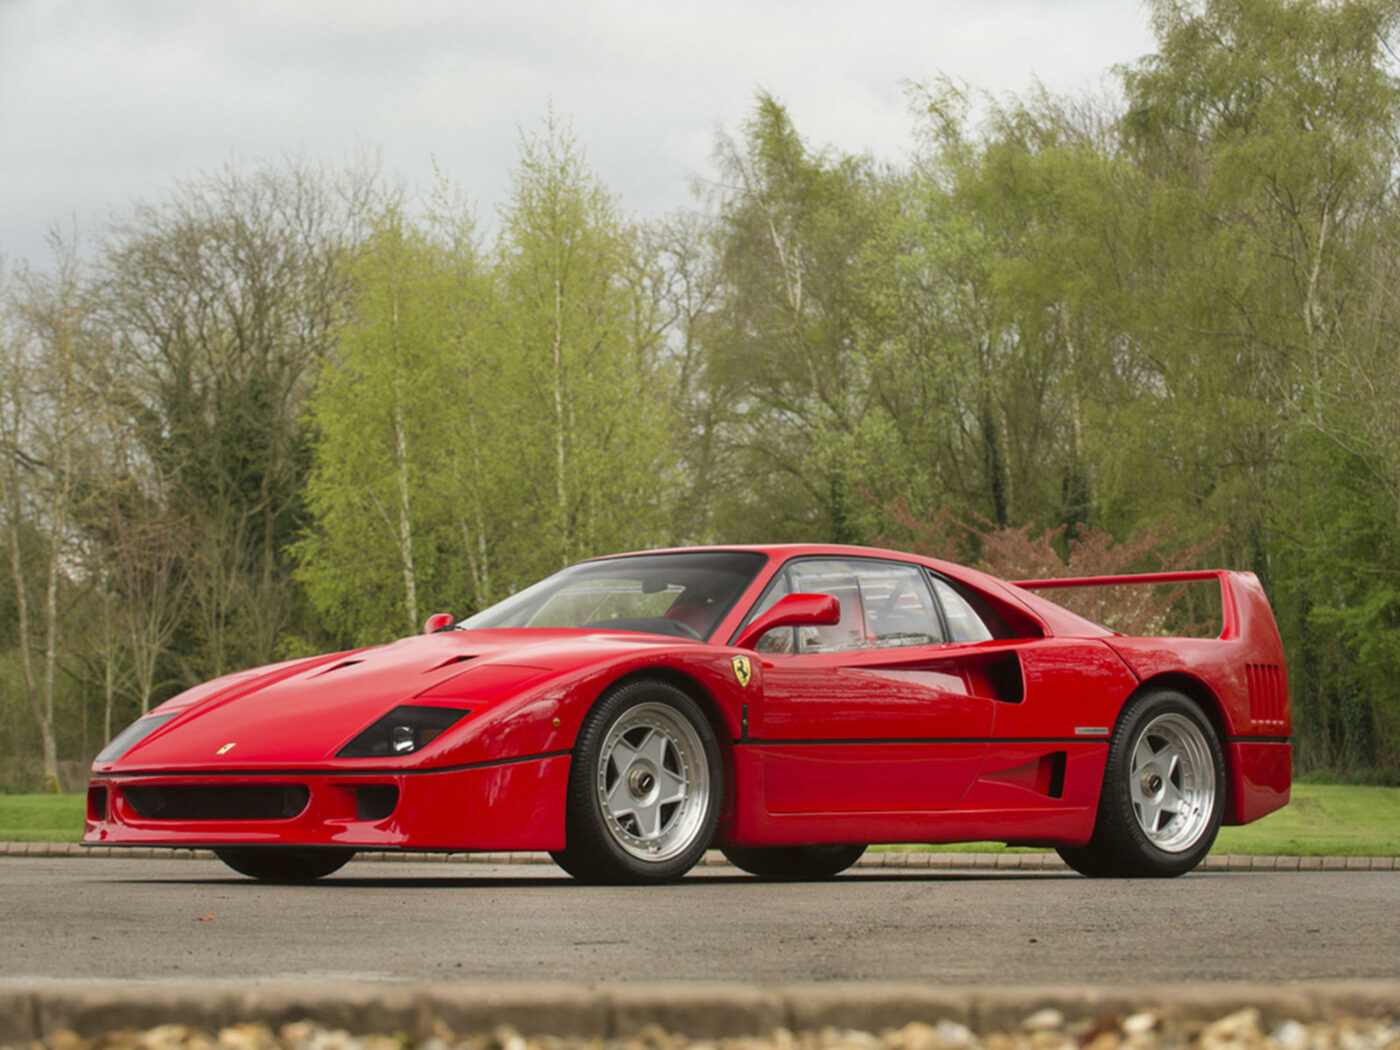 Red Ferrari F40 on road with trees behind